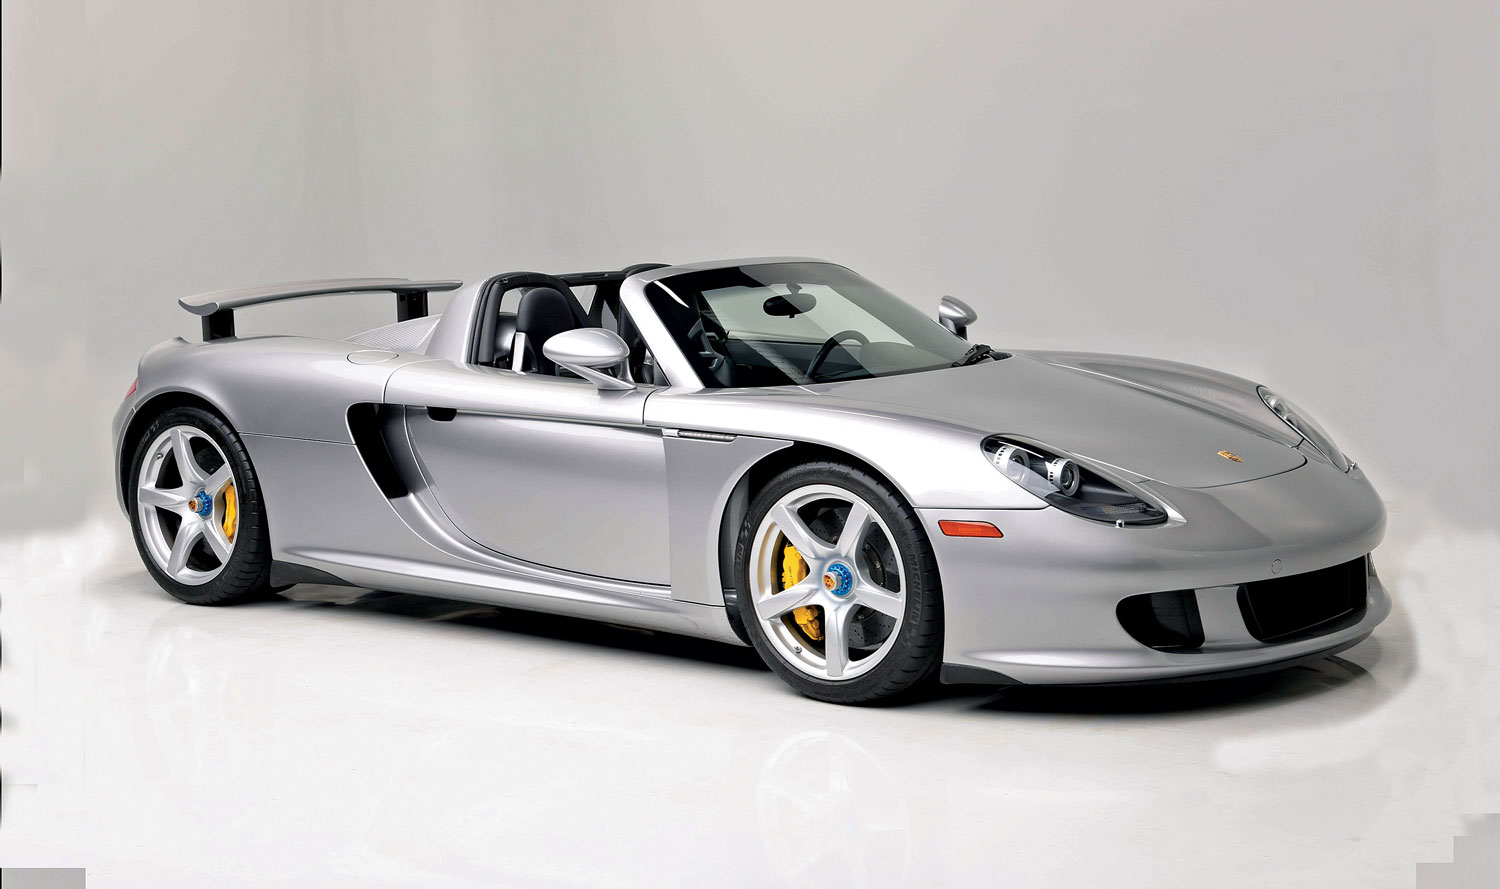 2004 Porsche Carrera GT Is Our Bring a Trailer Auction Pick of the Day